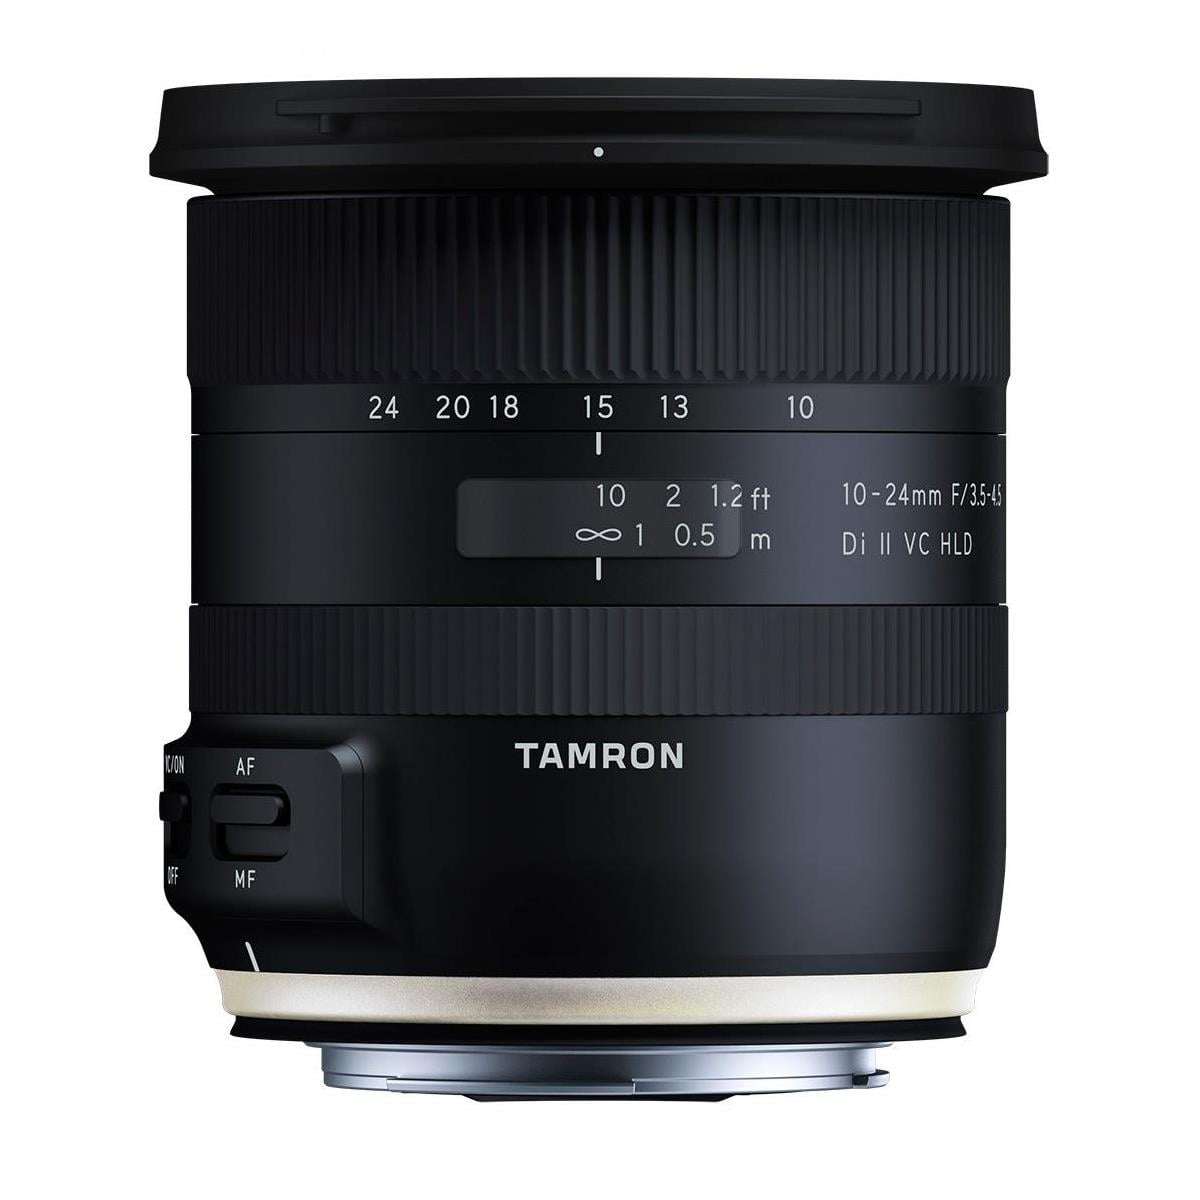 Tamron 10-24mm f/3.5-4.5 Di II VC HLD Wide Angle Lens for Canon EF